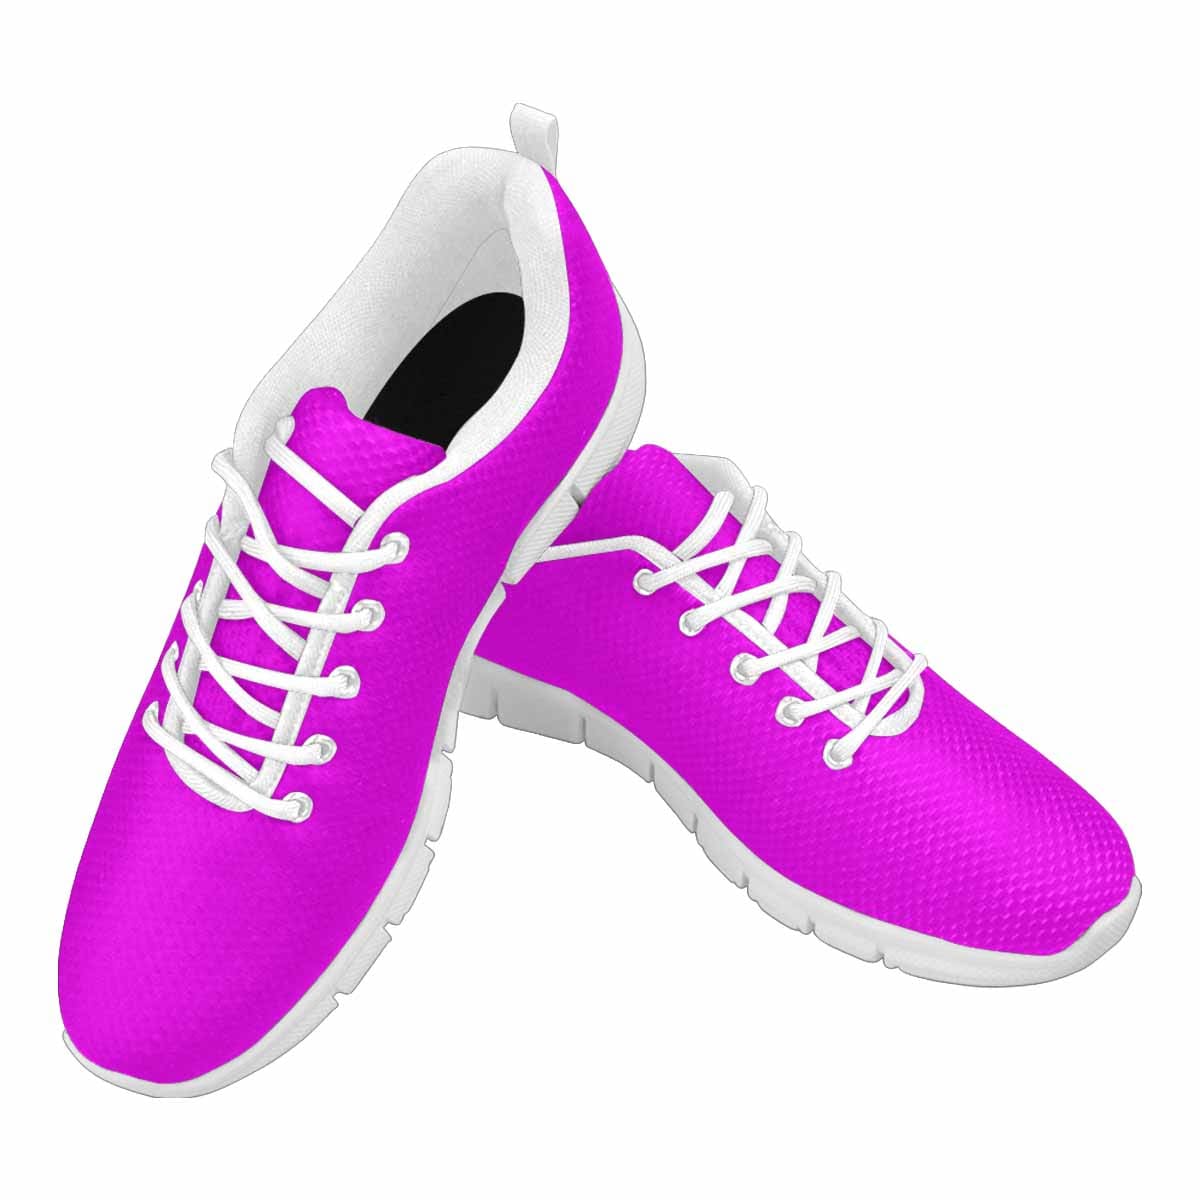 Sneakers For Men Fuchsia Pink - Running Shoes - Mens | Sneakers | Running